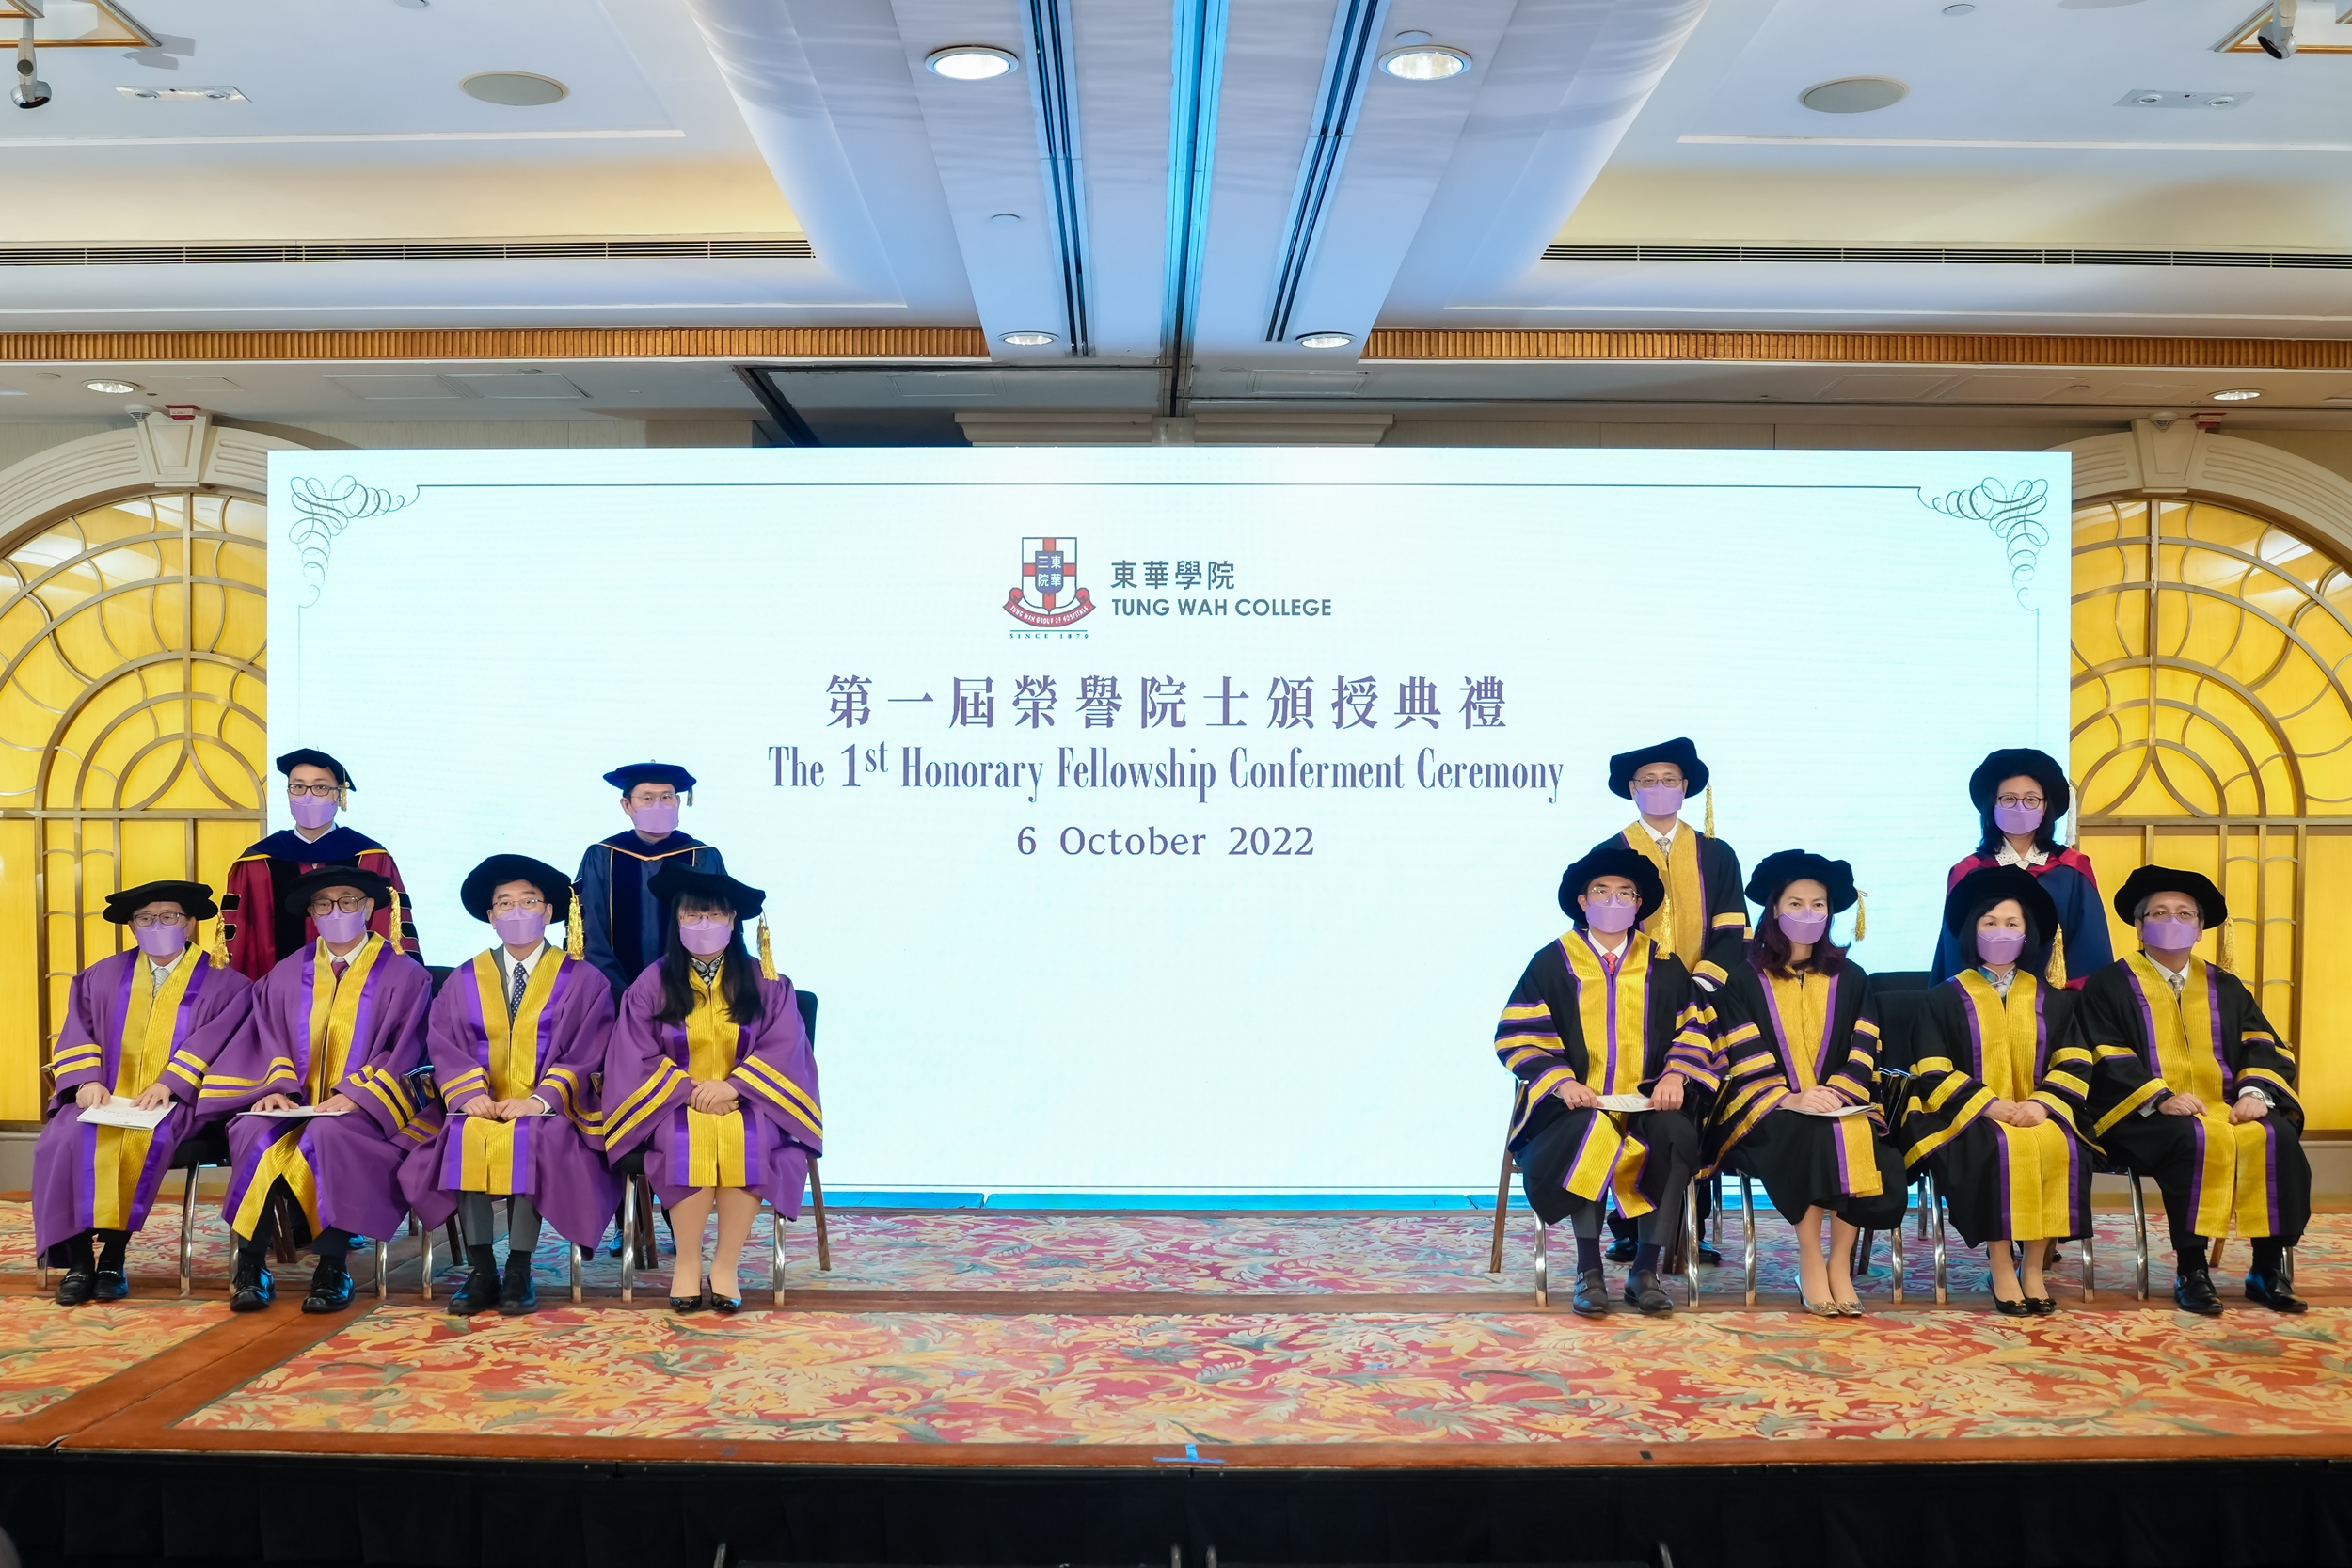 The ceremony is presided by Professor Alex CHAN Chi Keung, Dean of the School of Arts and Humanities of TWC (back row, left 1). Citation of the Honorary Fellowship recipients is delivered by Professor Lorna SUEN Kwai Ping, Dean of the School of Nursing (b